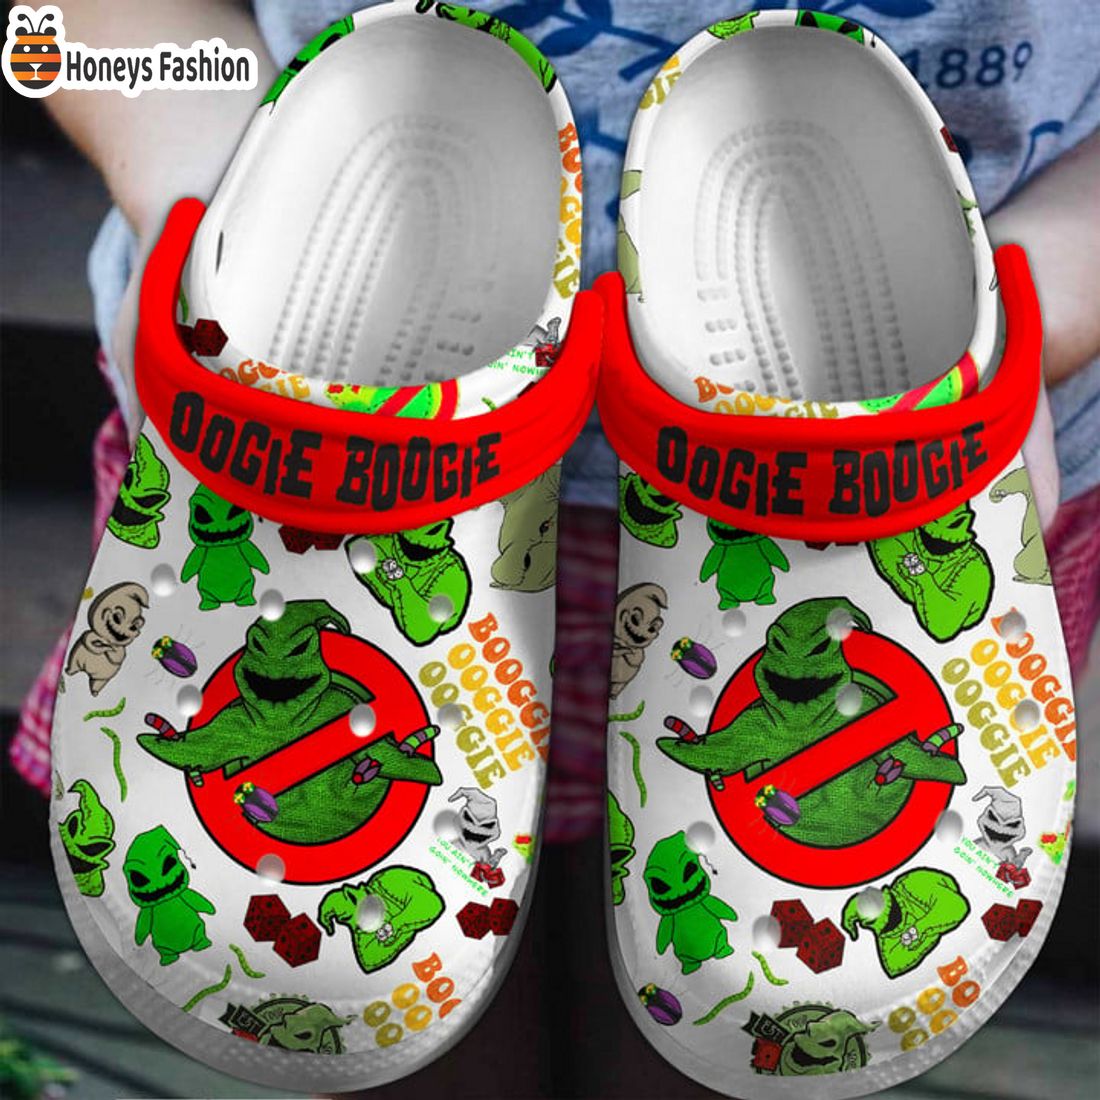 TOP Oogie Boogie You Ain’t Goin’ Nowhere Crocs Clog Shoes